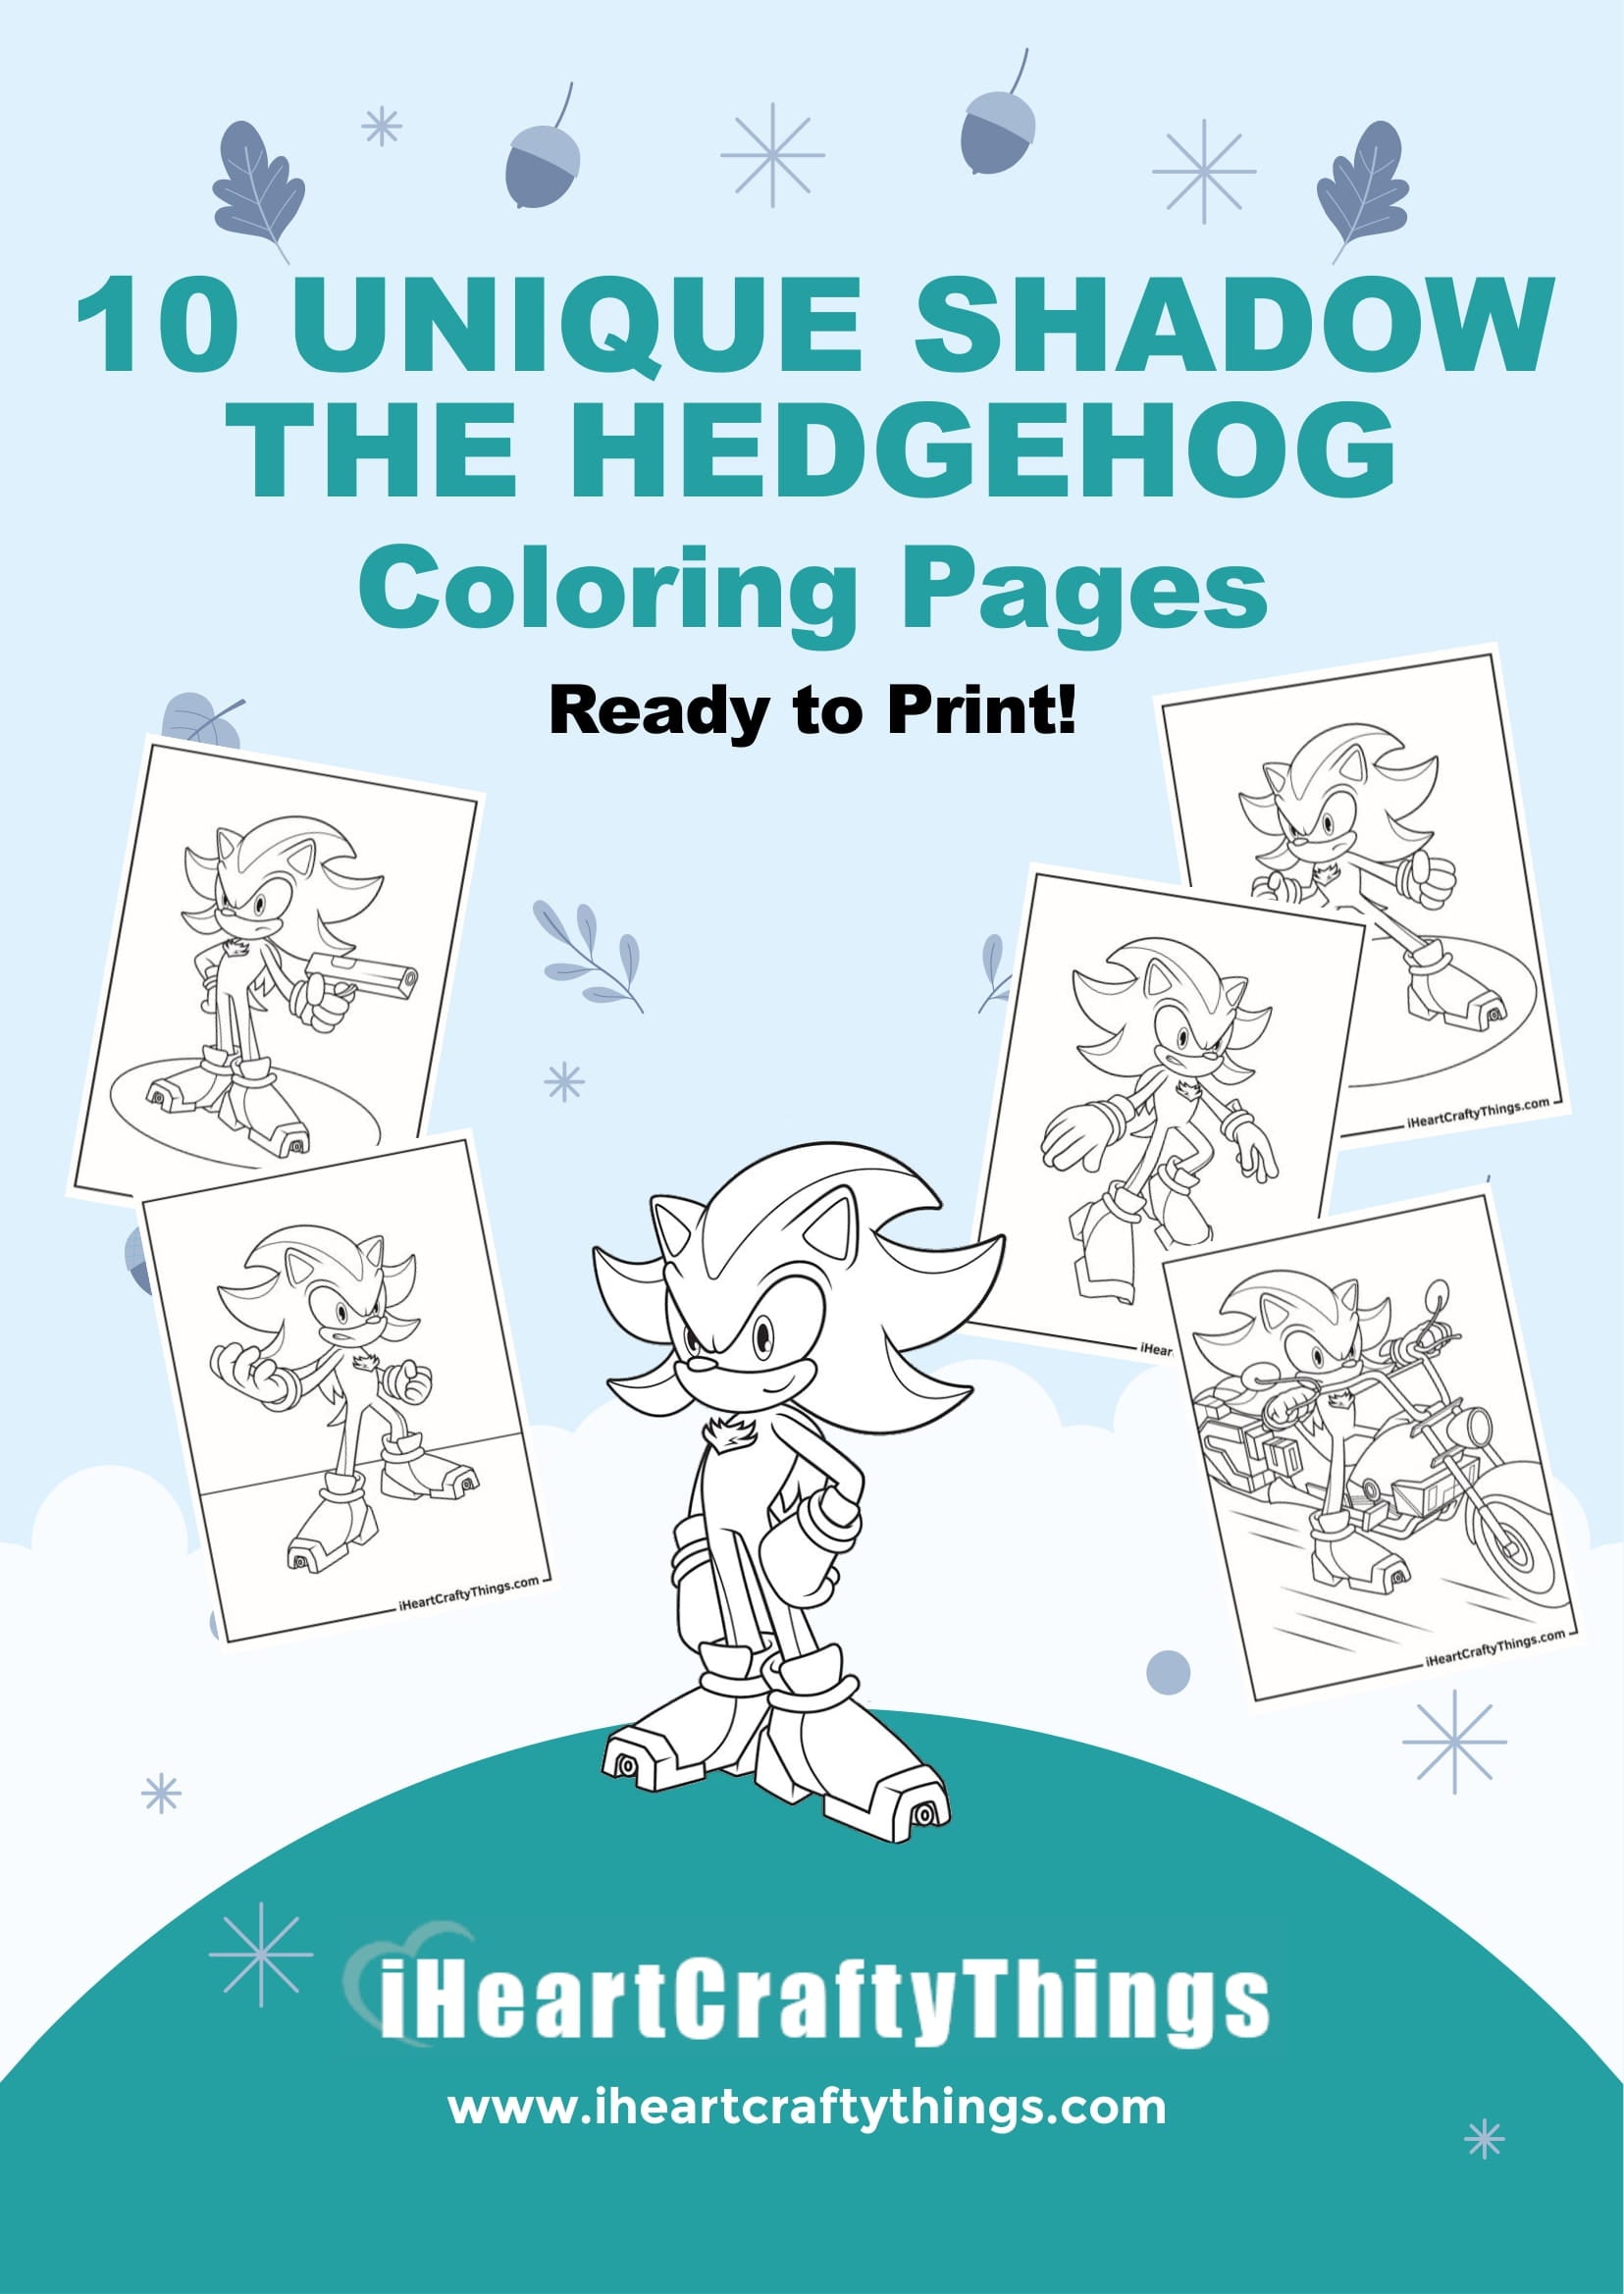 Shadow the hedgehog coloring pages â i heart crafty things